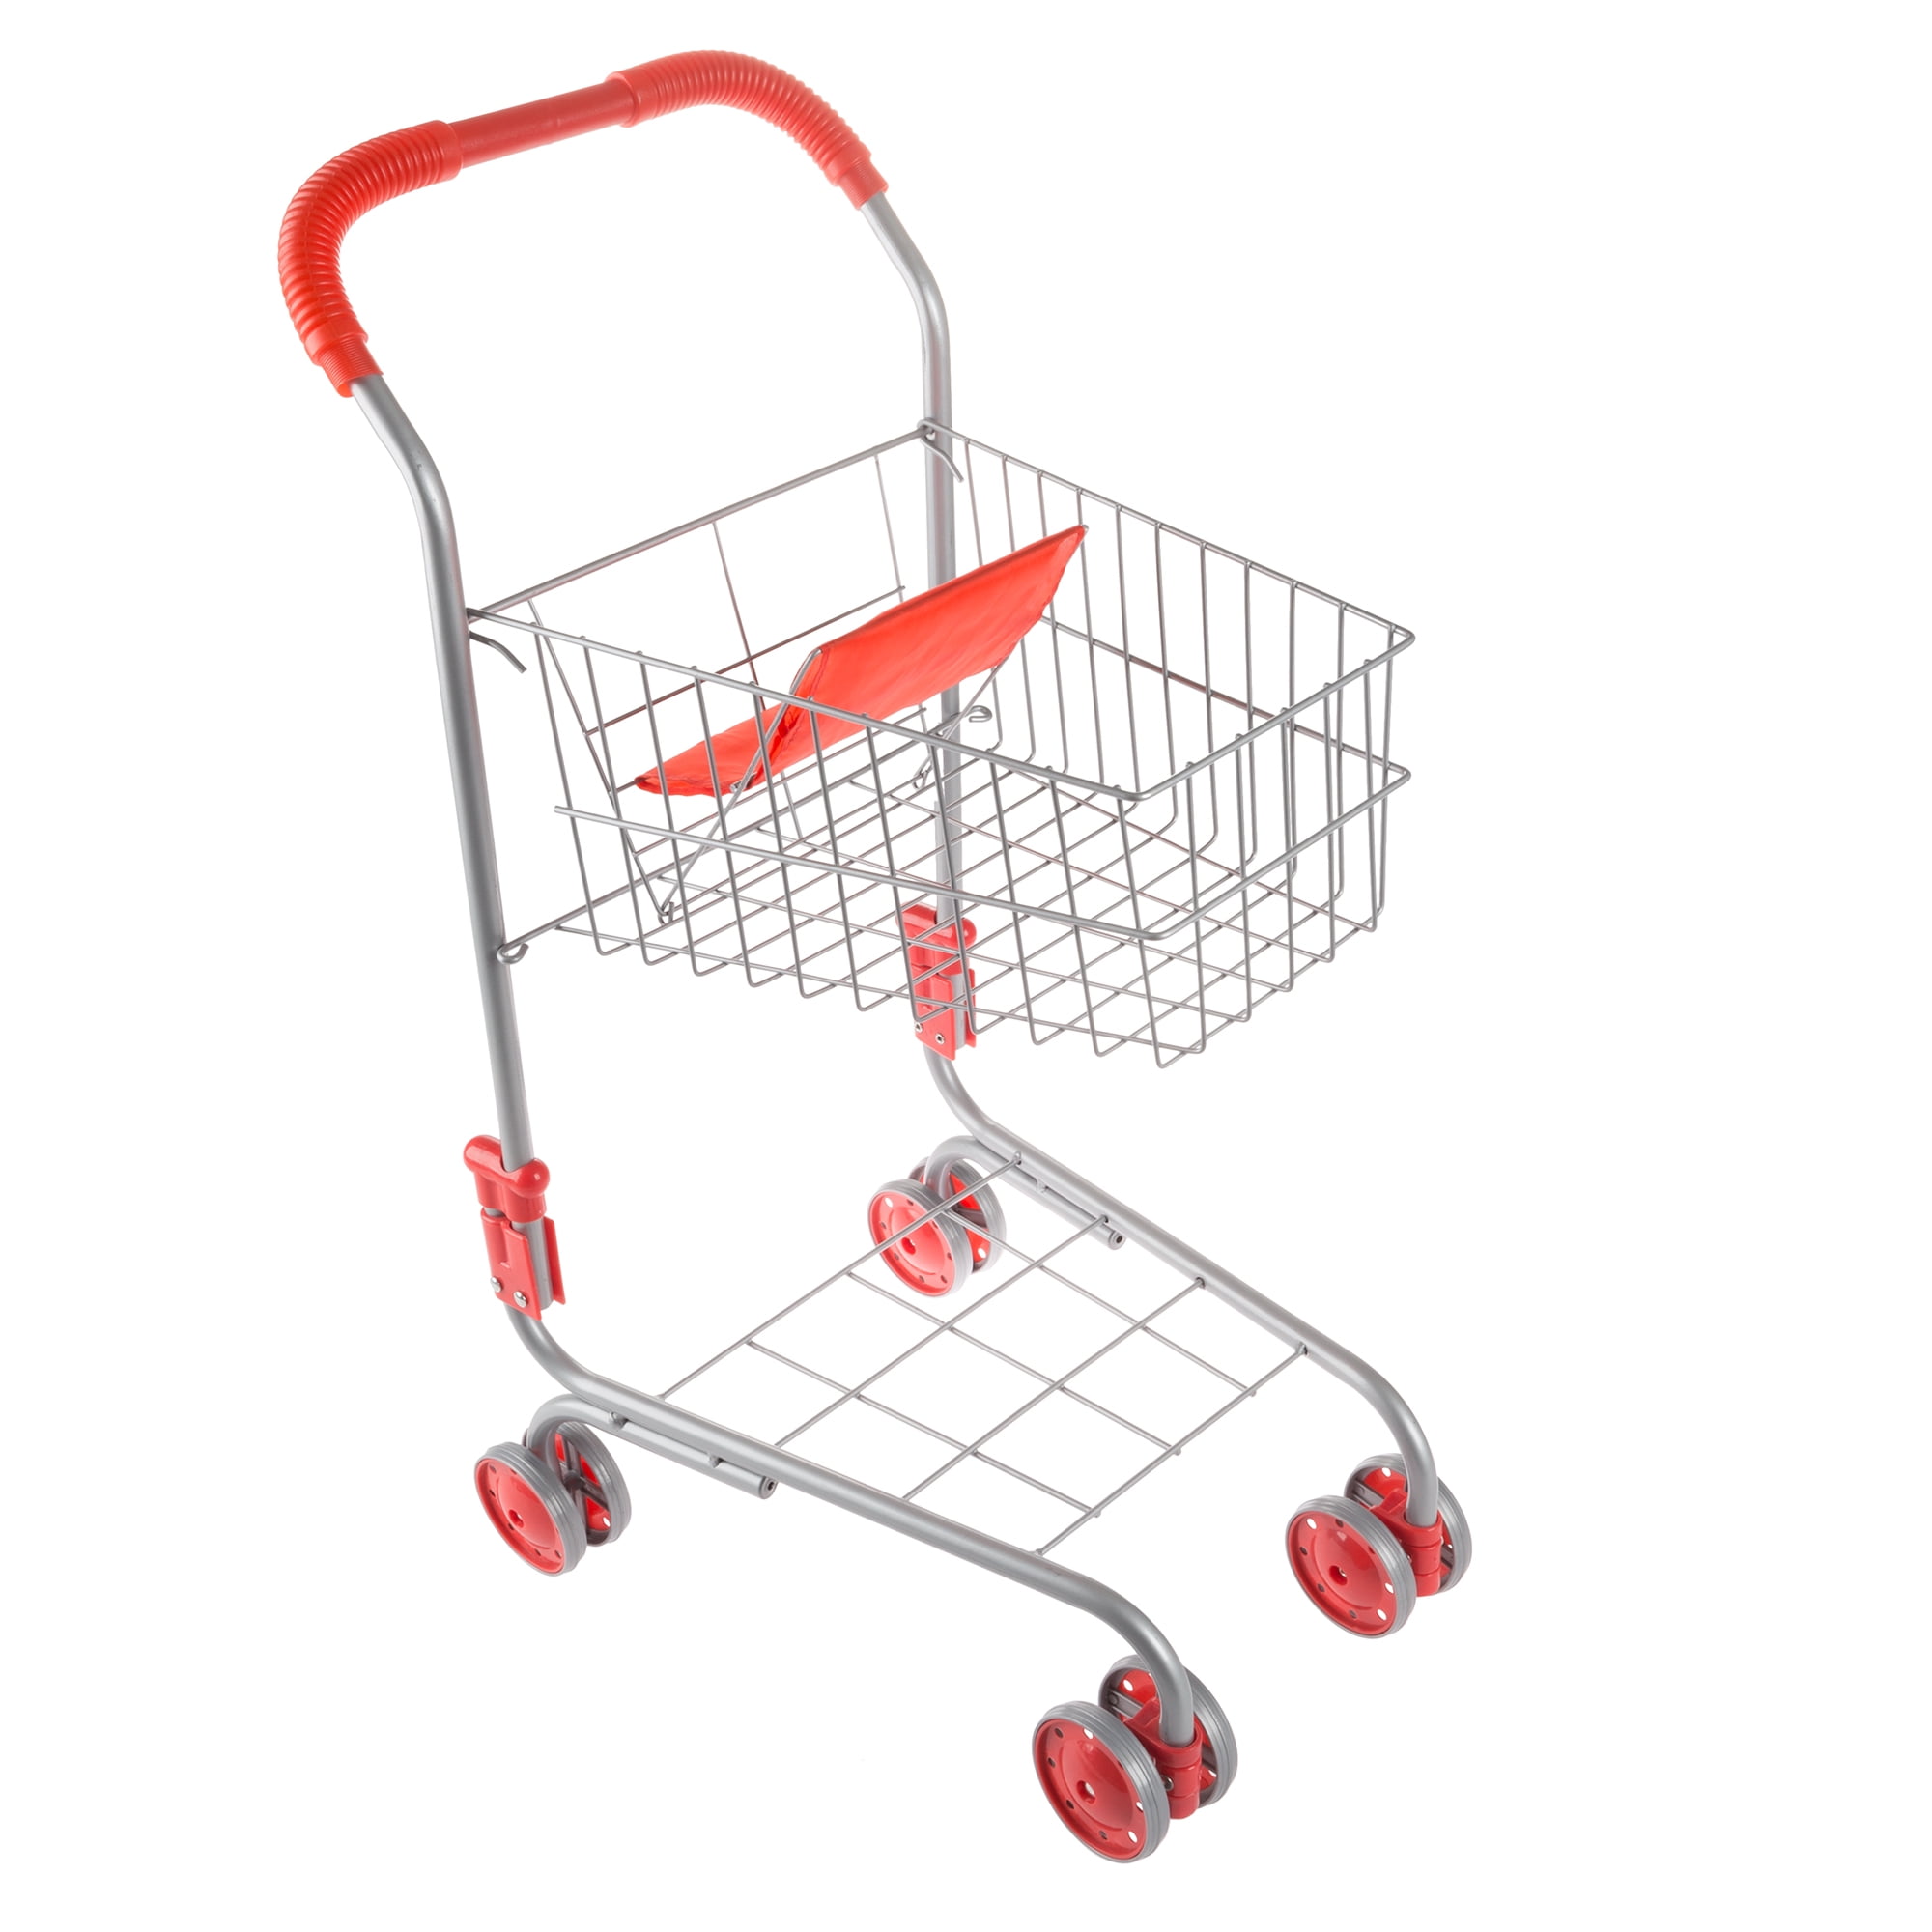 New Toy Grocery Shopping Cart Trolley Free Shipping Includes Play Food 